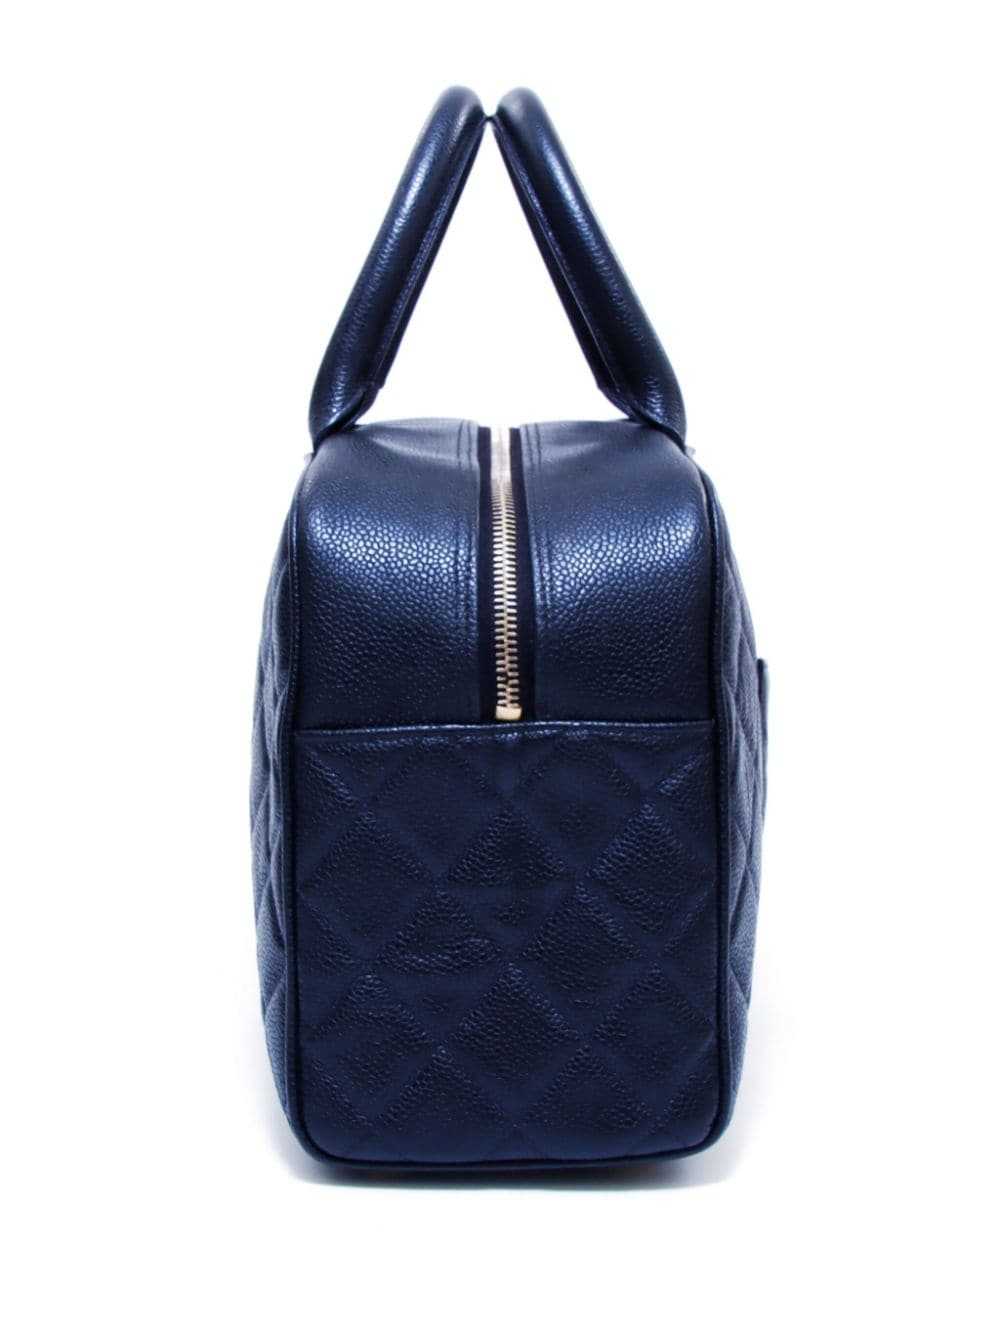 CHANEL Pre-Owned 2003-2004 diamond-quilted handba… - image 4